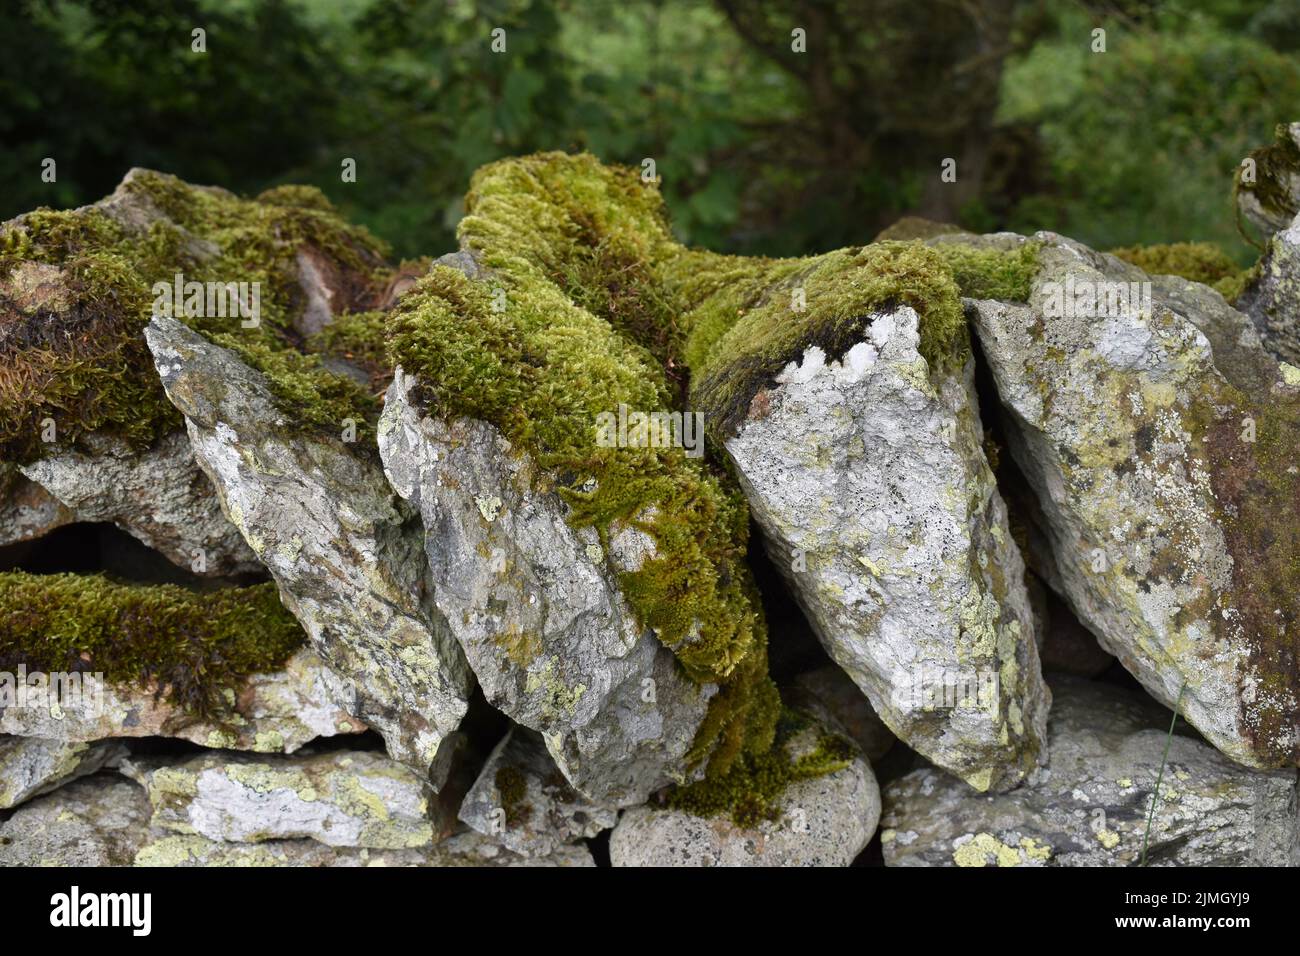 Moss growing on a dry stone wall. Stock Photo